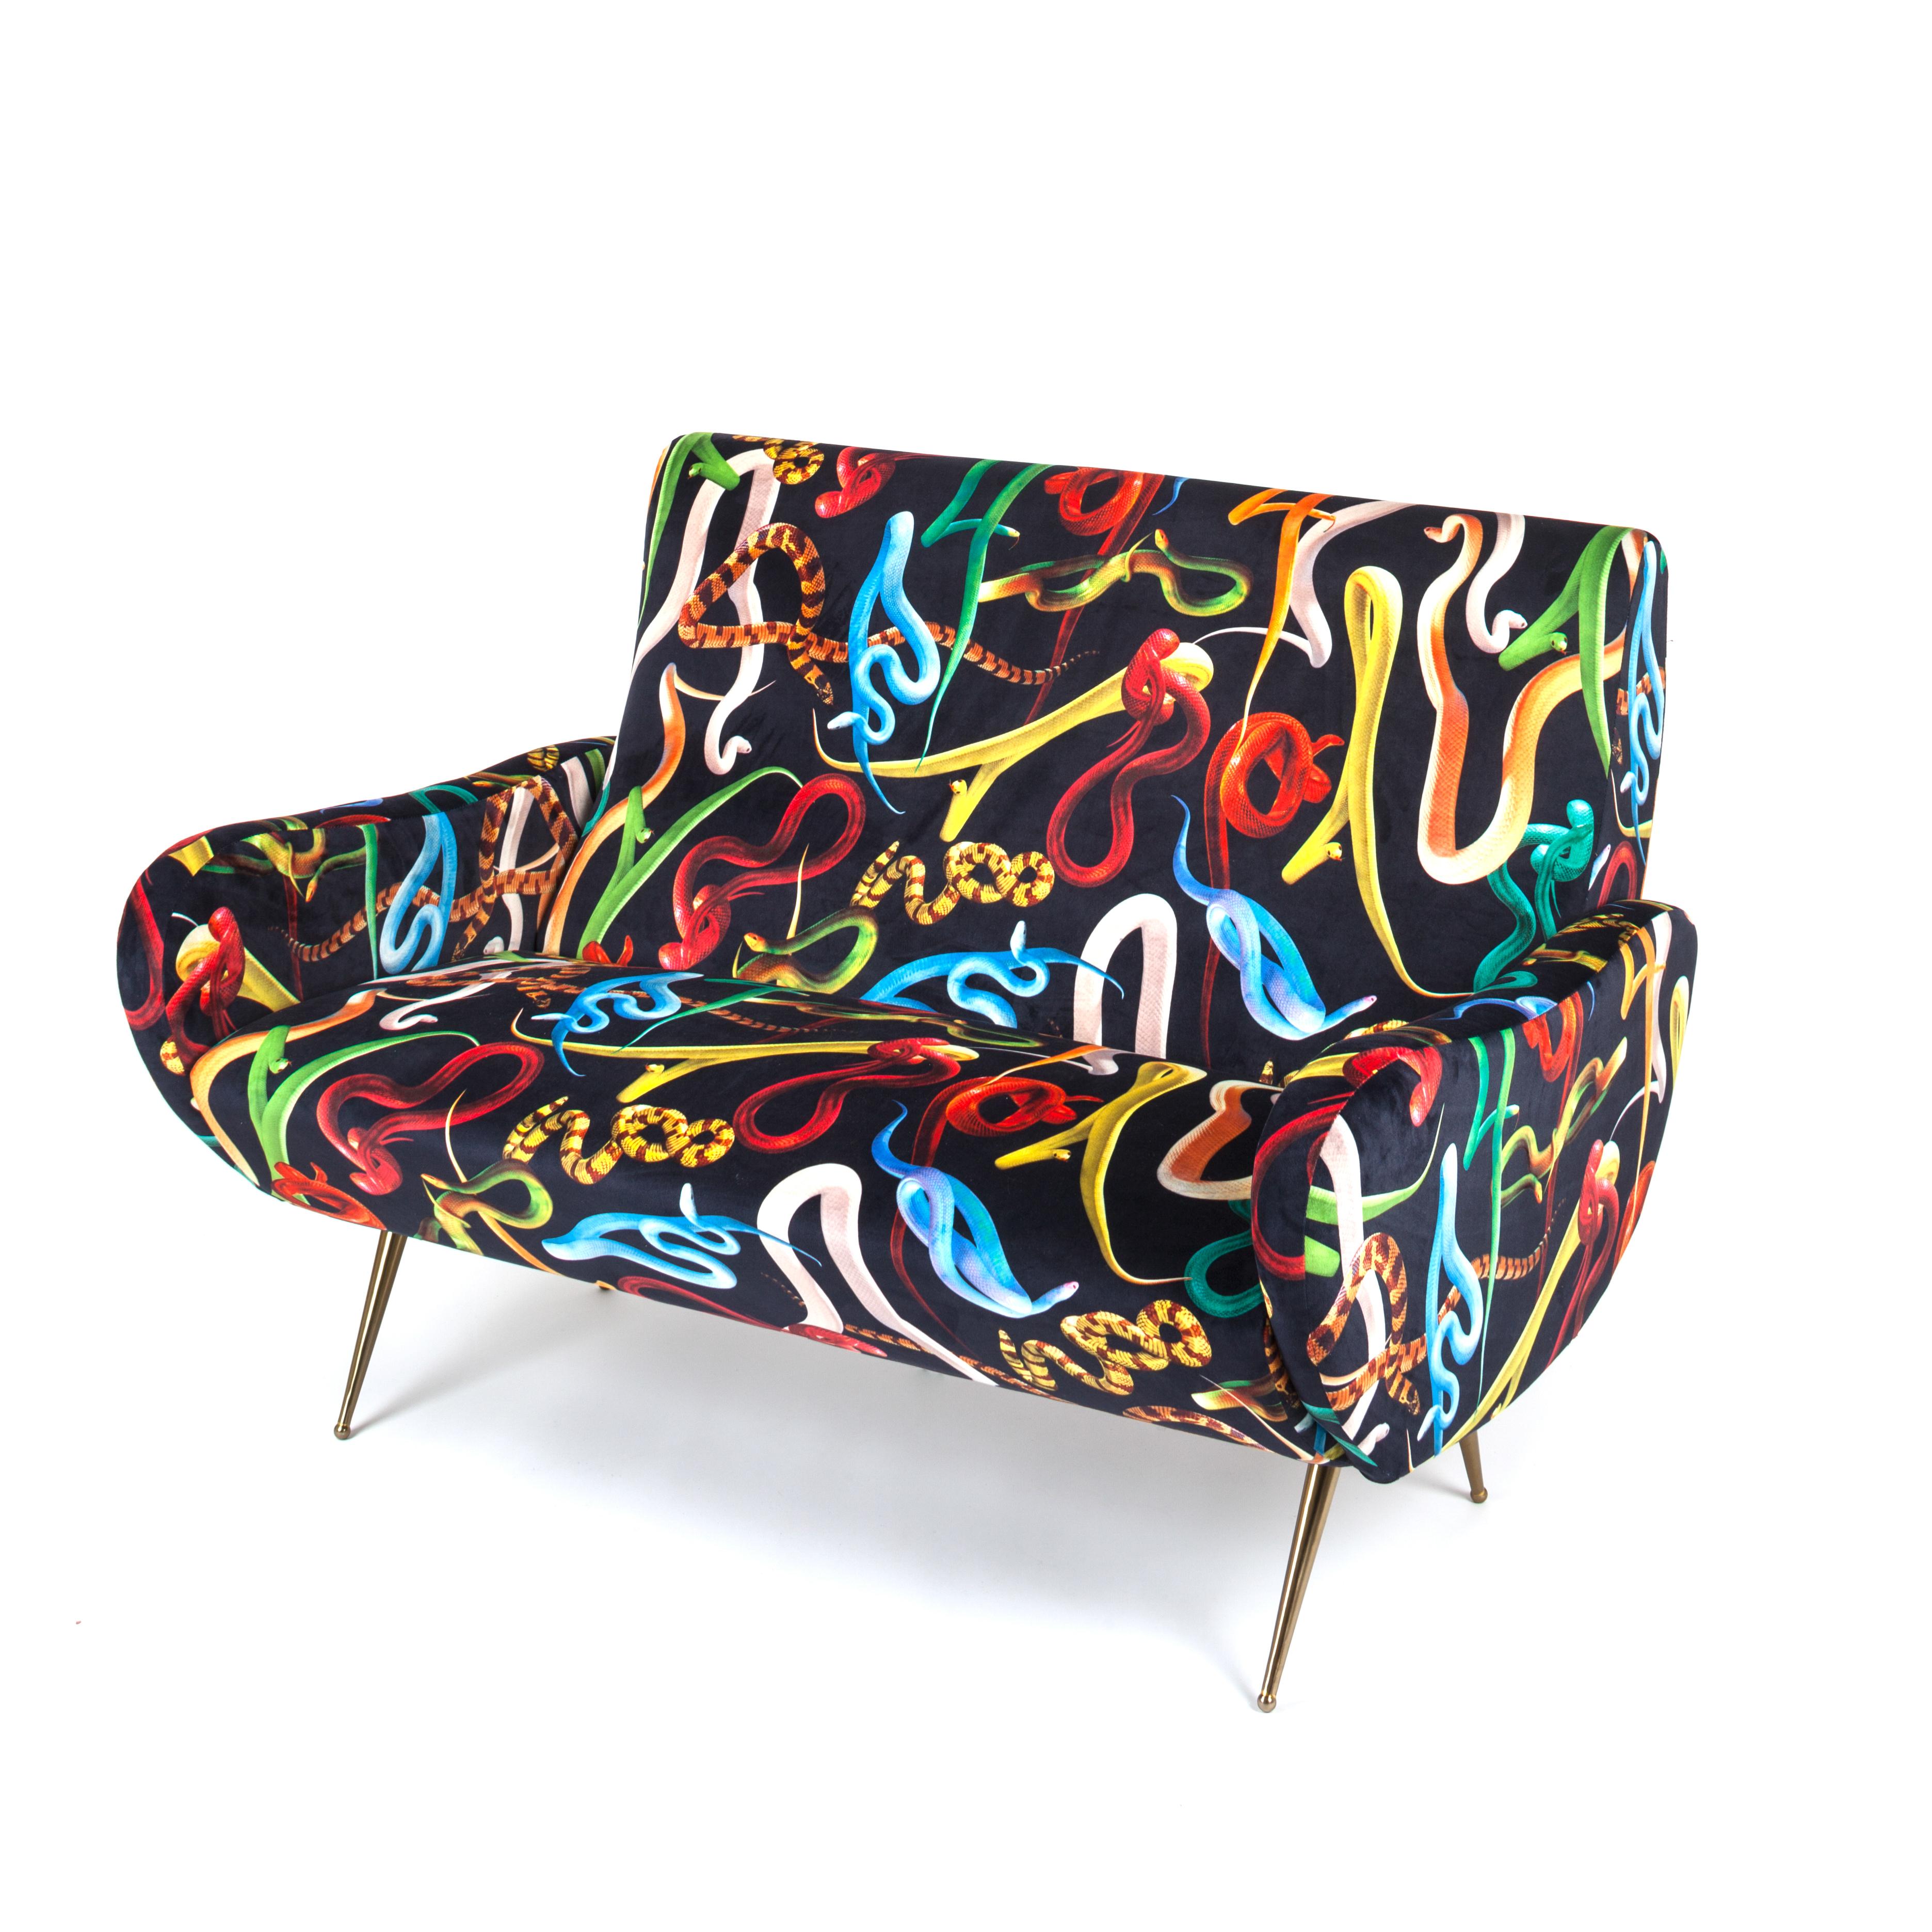 After the huge success of the armchair, the family gets bigger with the sofa. Decorate your living room with the eccentric patterns designed by Toiletpaper and realise your wildest dreams.

- Materials: Fabrics in polyester, frame in wood with